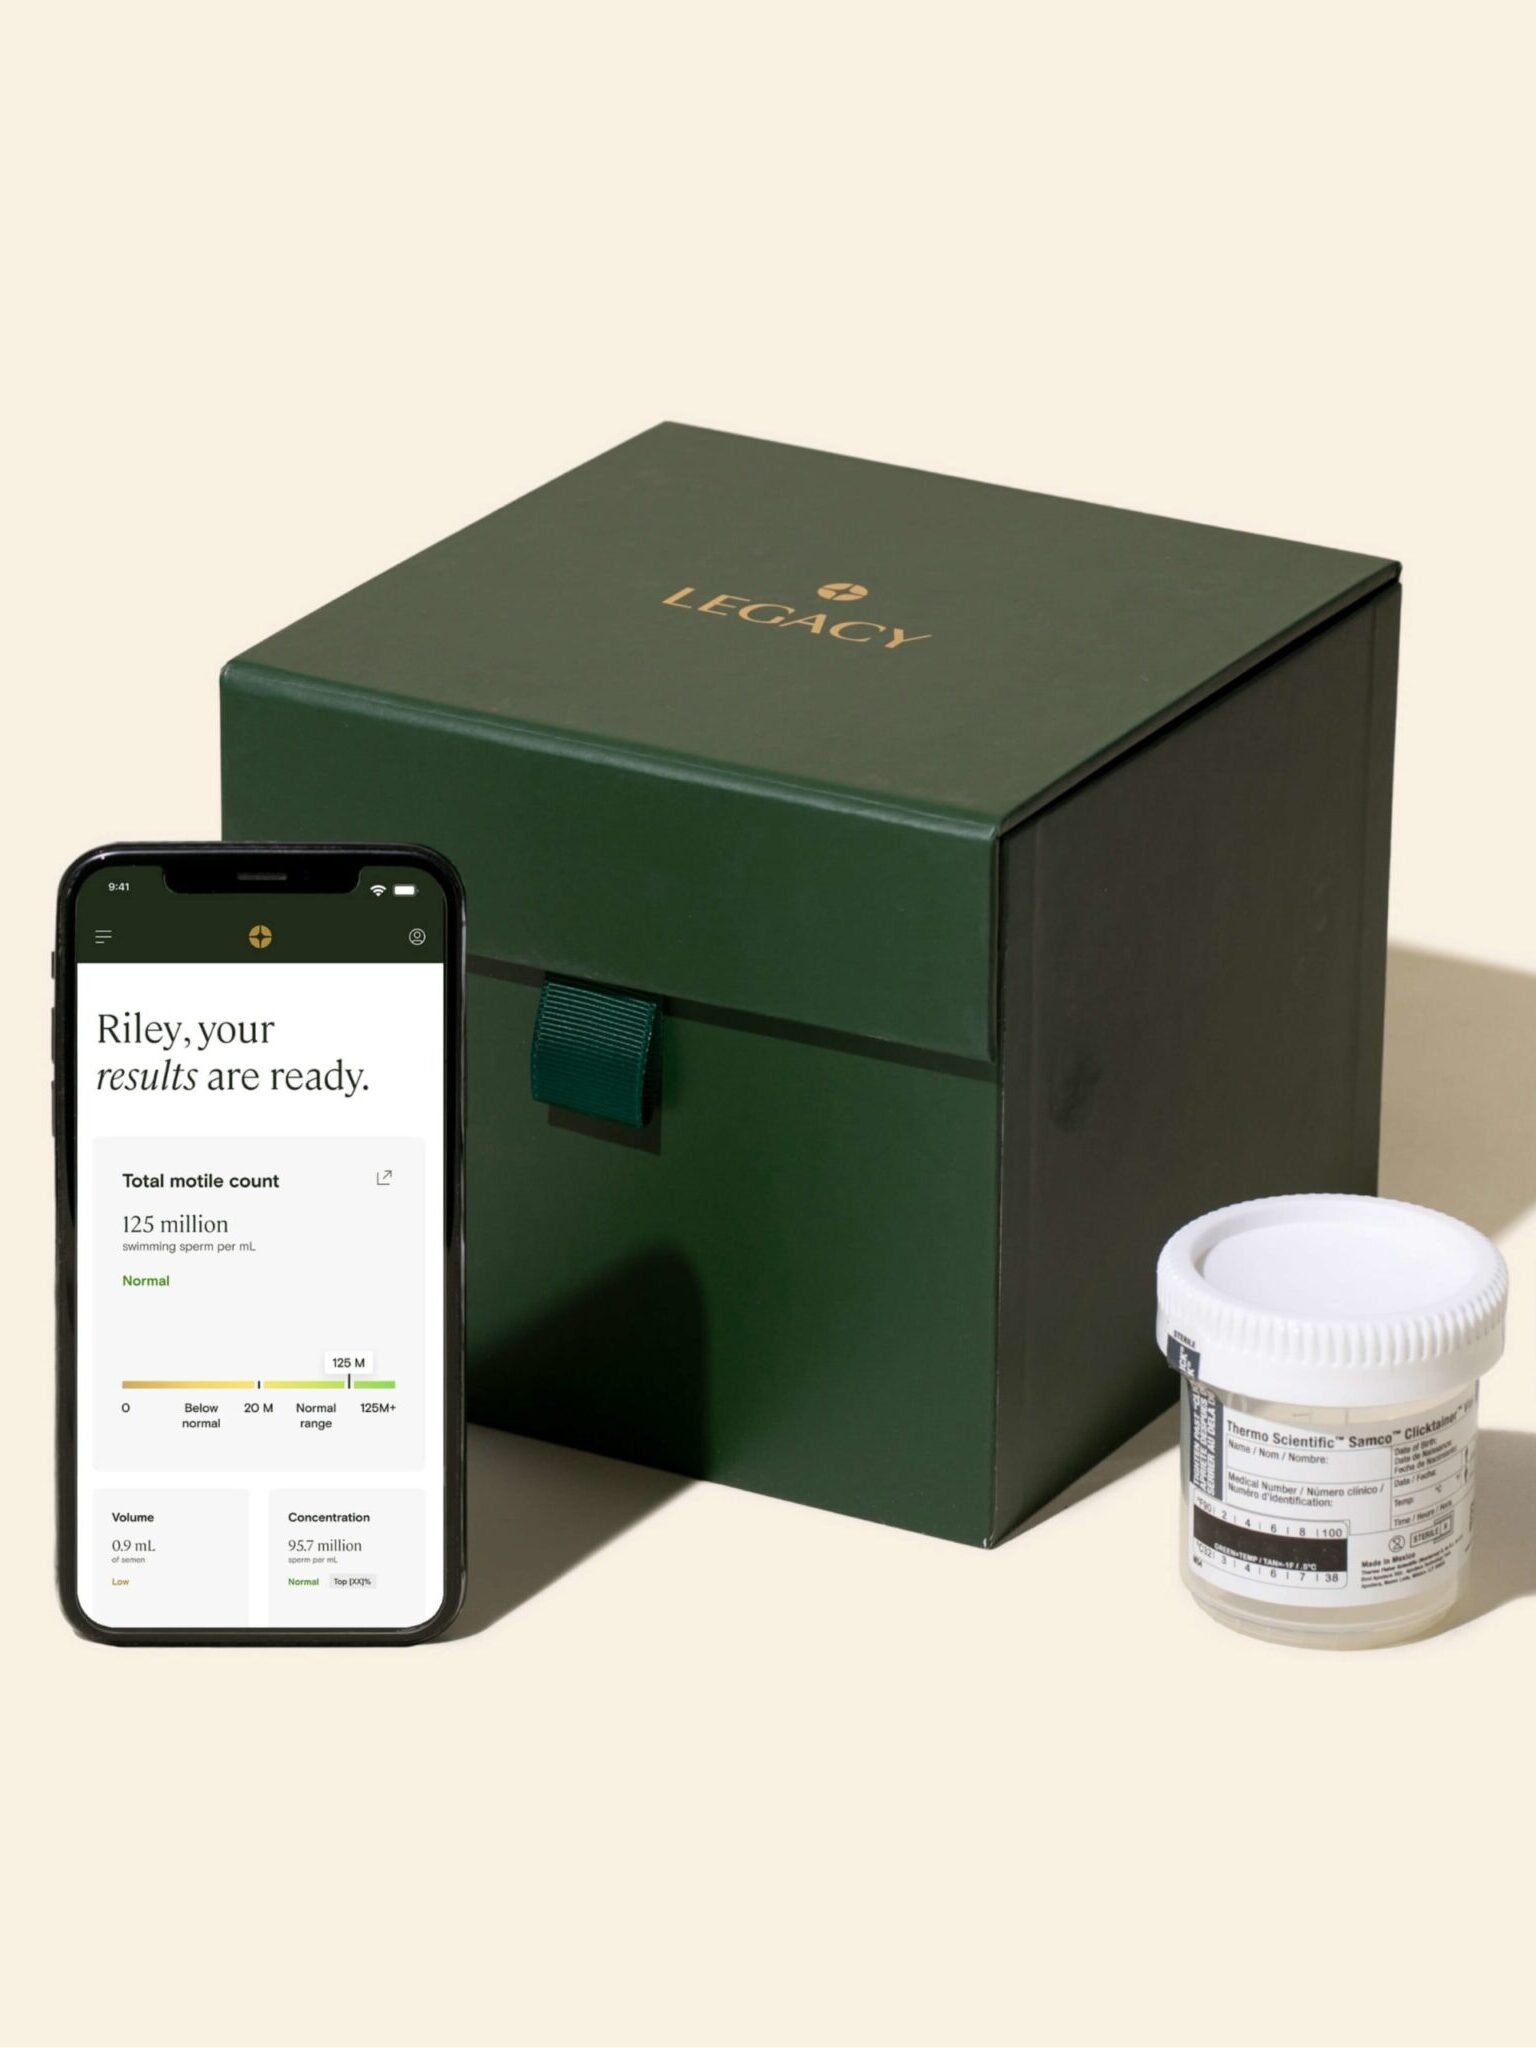 Legacy at-home fertility testing materials and app